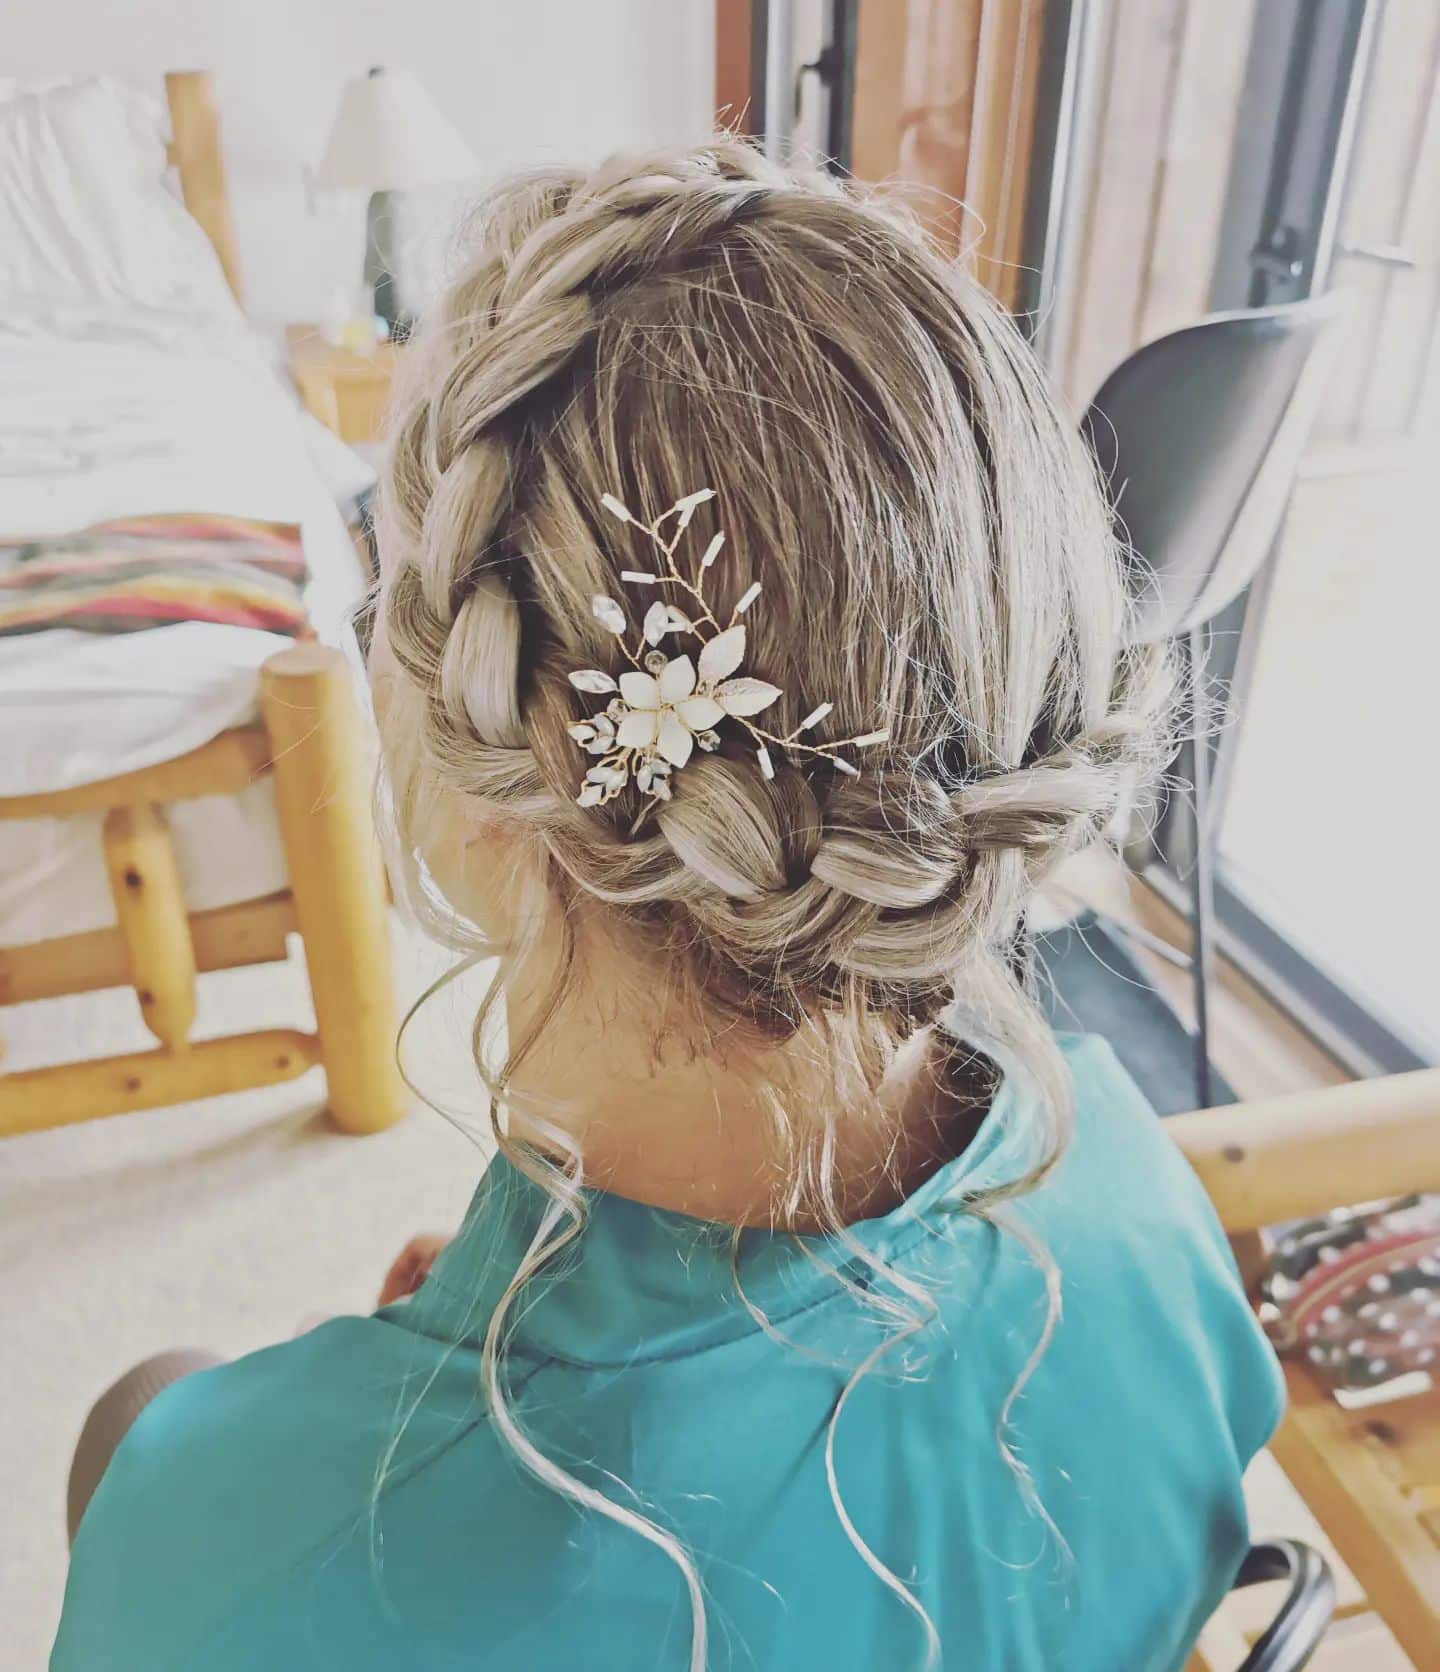 Image of Braided Crown With Curls in the style of Braids With Curls